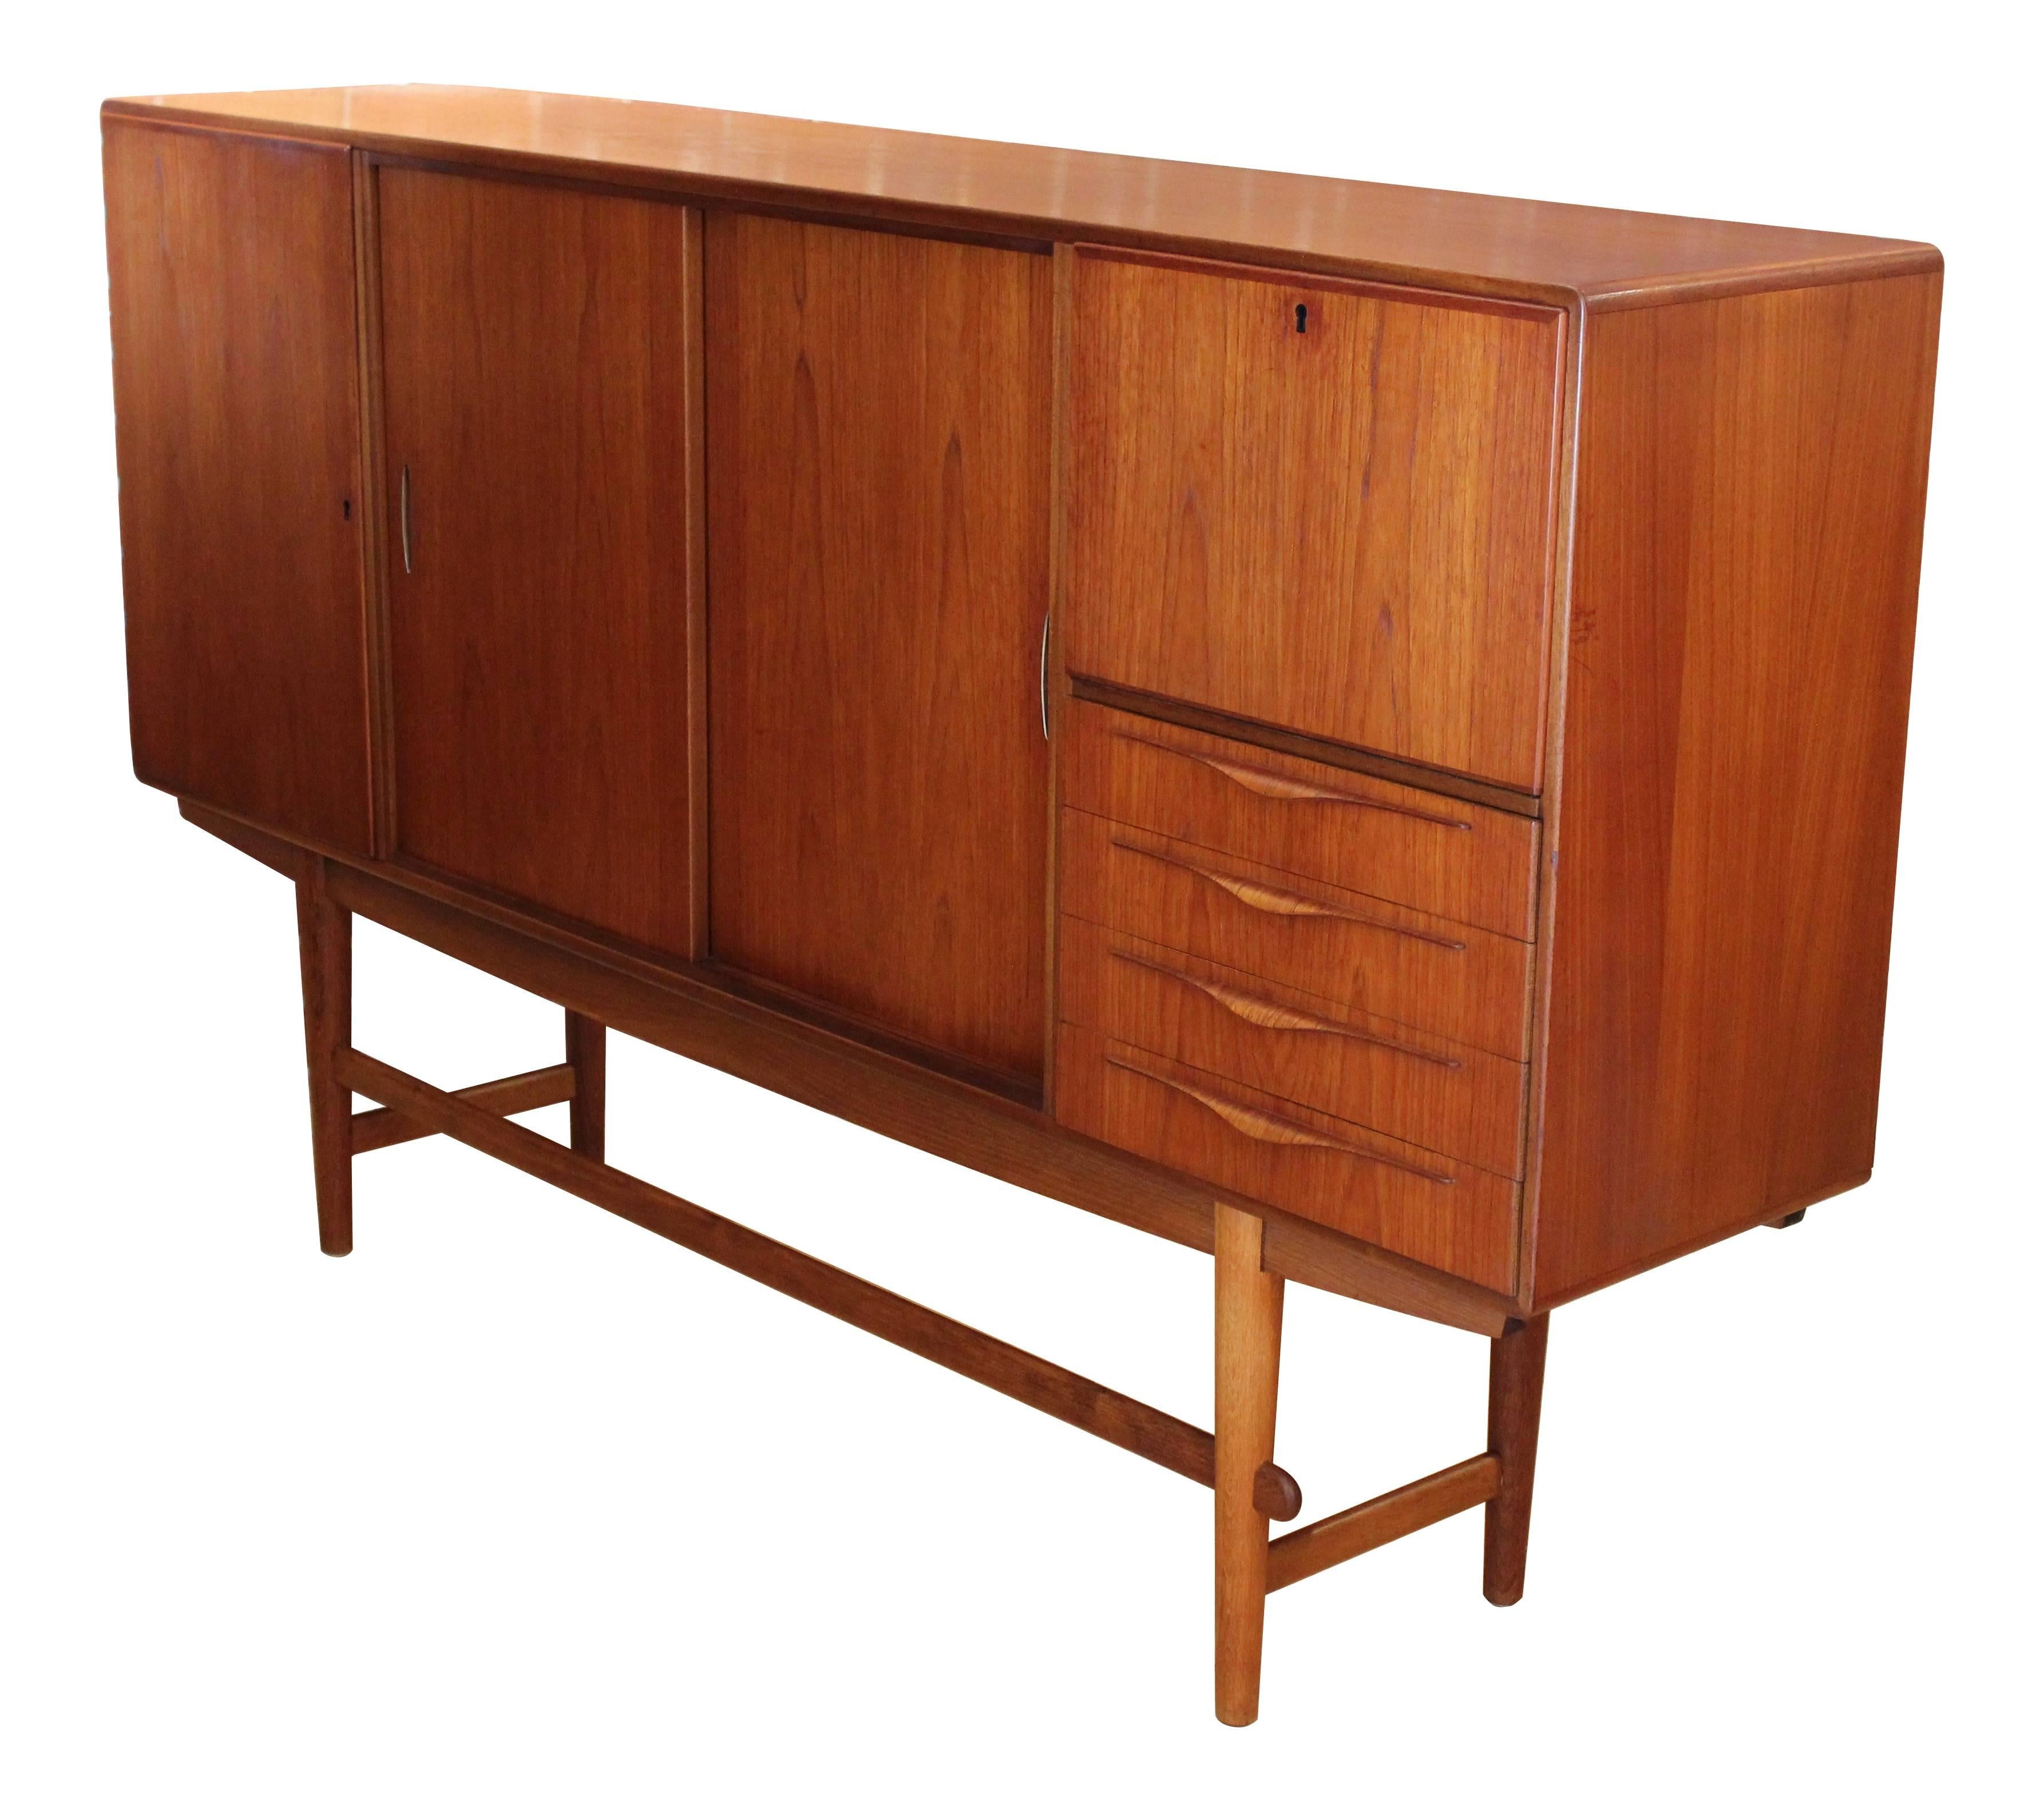 Large Danish modern teak sideboard designed by Illum Wikkelso for Holger Christiansen of Copenhagen, circa 1955. A rare and beautiful design, with locking bar and locking silver cabinet (with two felt-lined drawers), heavy sliding cabinet doors with